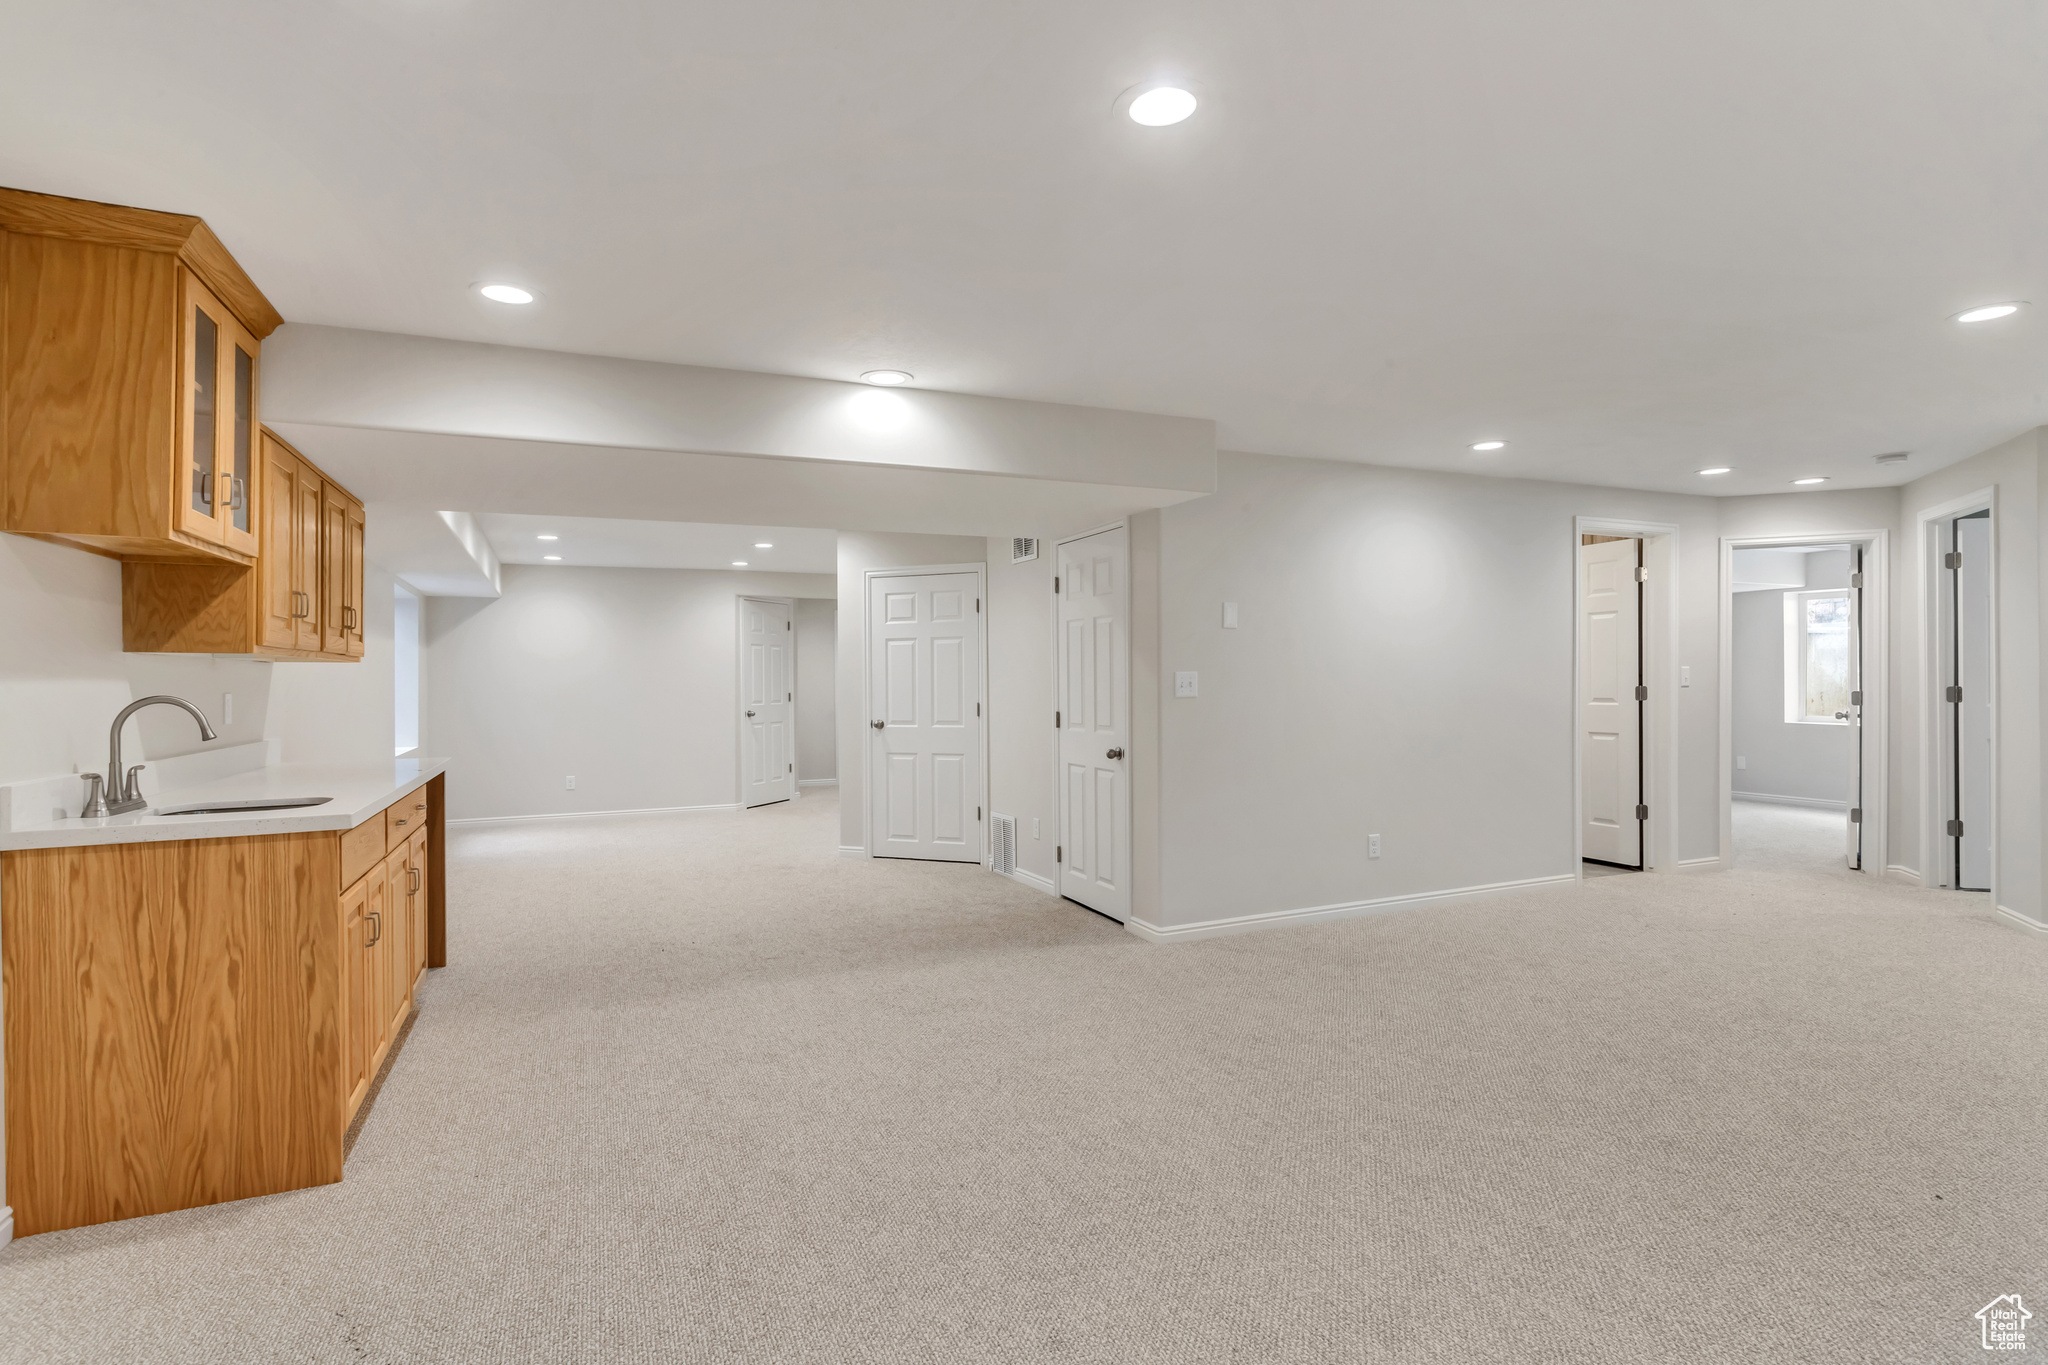 Huge family room in basement with kitchenette with all new carpet. Perfect space for guests, entertaining, or privacy